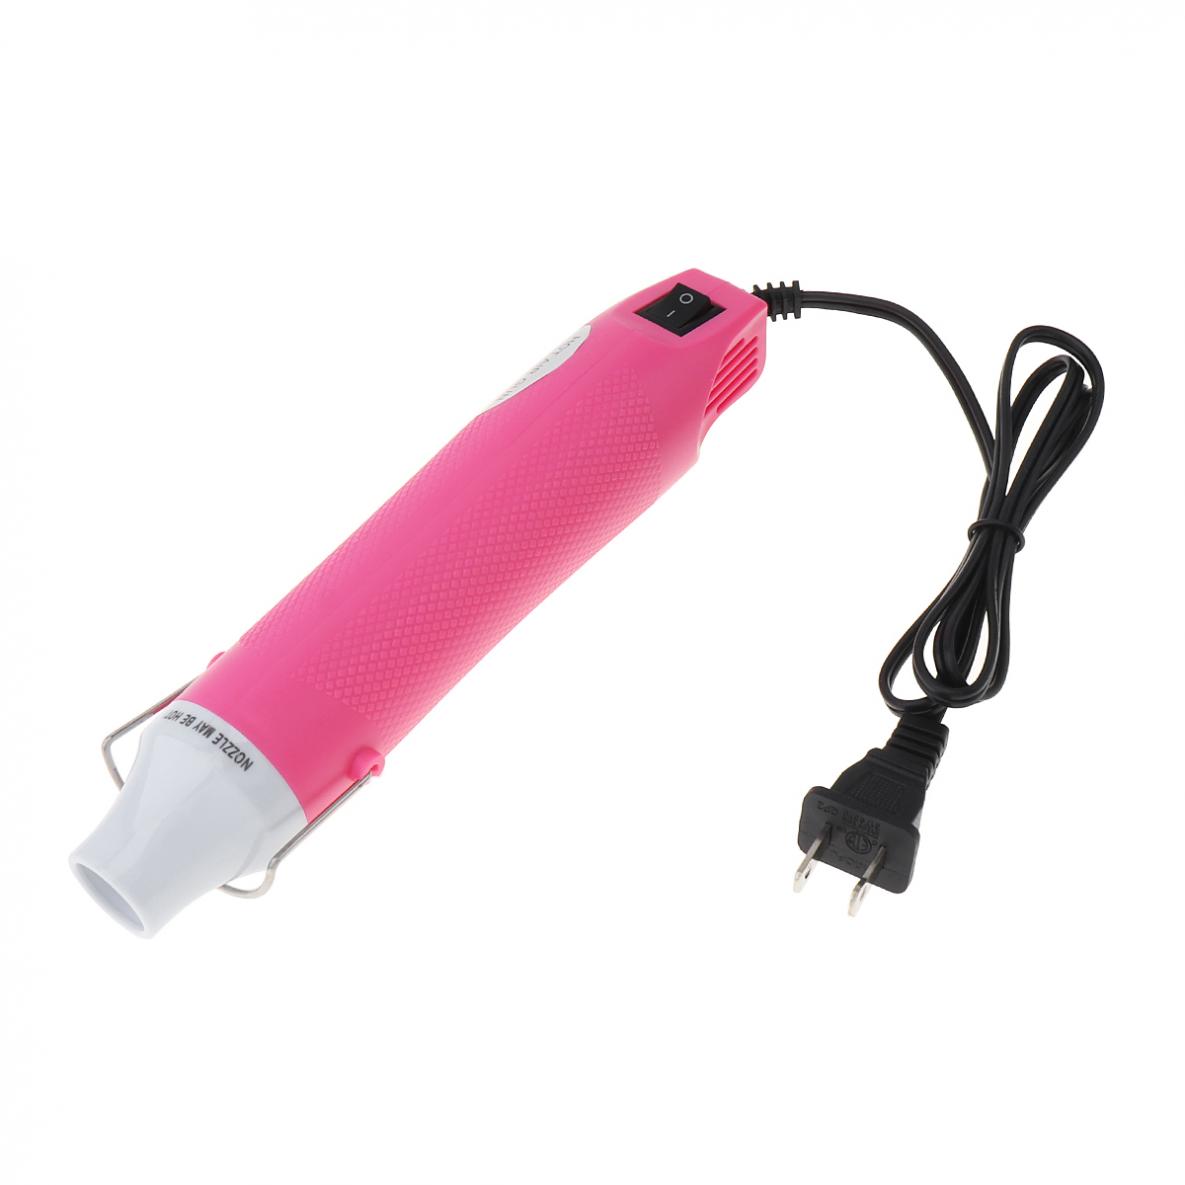 110V / 220V 300W Heat Gun DIY Electric Blower Manual Tool with Shrink Plastic Surface and EU US Plug for Heating DIY Accessories